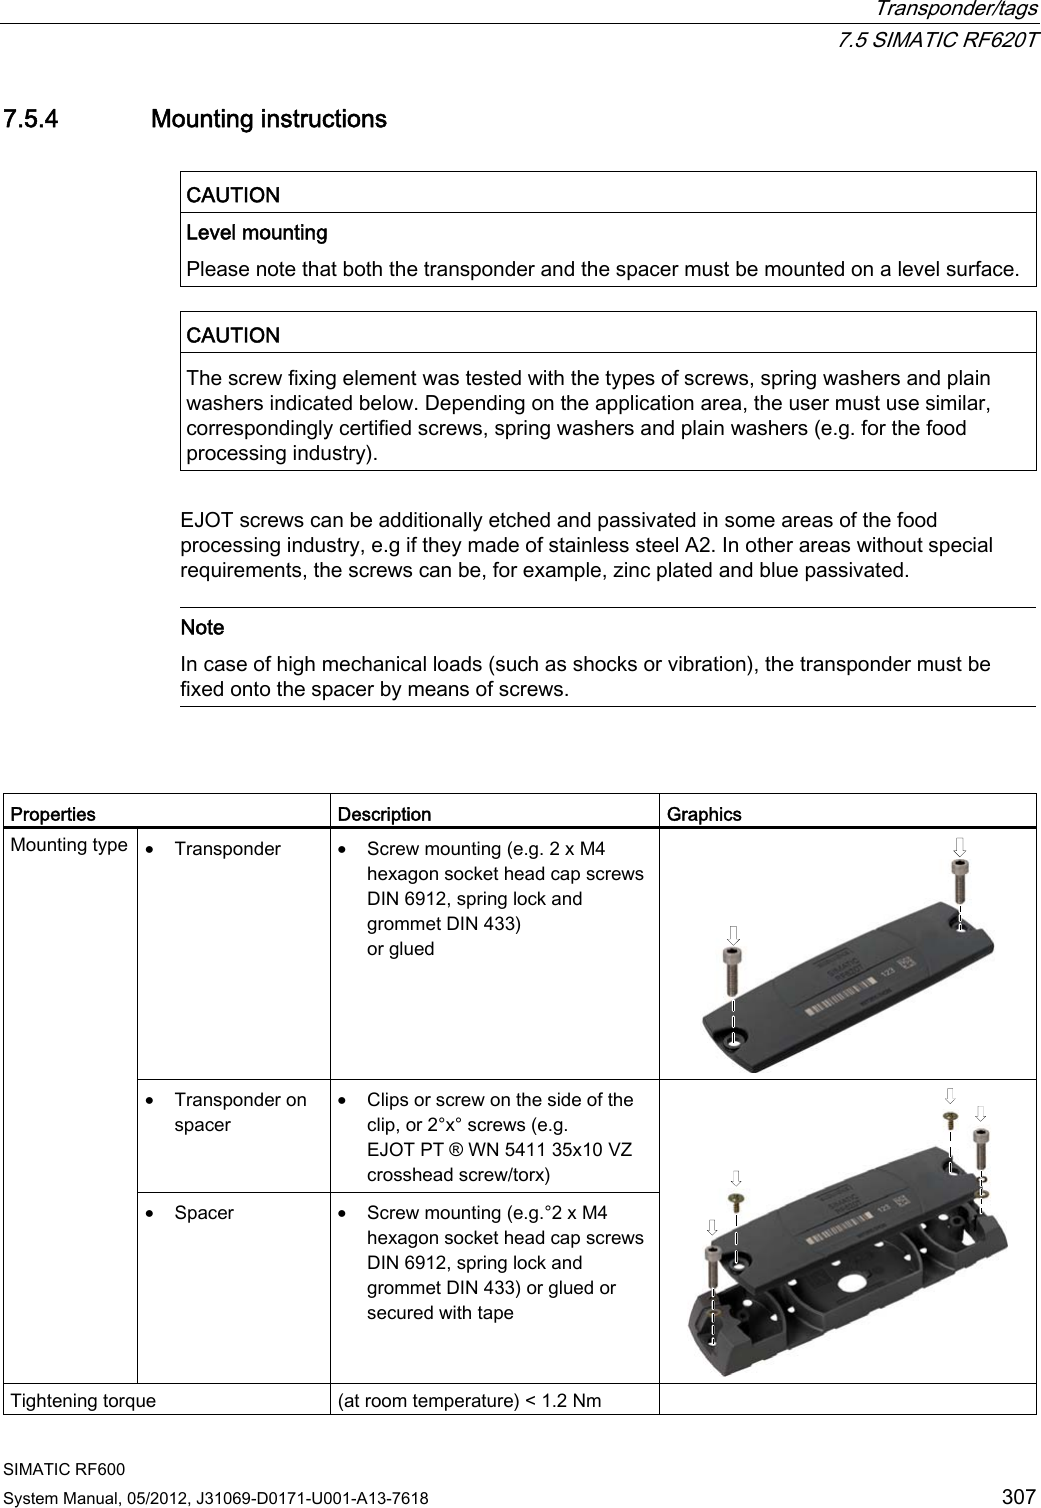  Transponder/tags  7.5 SIMATIC RF620T SIMATIC RF600 System Manual, 05/2012, J31069-D0171-U001-A13-7618  307 7.5.4 Mounting instructions  CAUTION  Level mounting Please note that both the transponder and the spacer must be mounted on a level surface.  CAUTION  The screw fixing element was tested with the types of screws, spring washers and plain washers indicated below. Depending on the application area, the user must use similar, correspondingly certified screws, spring washers and plain washers (e.g. for the food processing industry).  EJOT screws can be additionally etched and passivated in some areas of the food processing industry, e.g if they made of stainless steel A2. In other areas without special requirements, the screws can be, for example, zinc plated and blue passivated.   Note In case of high mechanical loads (such as shocks or vibration), the transponder must be fixed onto the spacer by means of screws.    Properties  Description  Graphics • Transponder  • Screw mounting (e.g. 2 x M4 hexagon socket head cap screws DIN 6912, spring lock and grommet DIN 433)  or glued   • Transponder on spacer • Clips or screw on the side of the clip, or 2°x° screws (e.g. EJOT PT ® WN 5411 35x10 VZ crosshead screw/torx) Mounting type  • Spacer  • Screw mounting (e.g.°2 x M4 hexagon socket head cap screws DIN 6912, spring lock and grommet DIN 433) or glued or secured with tape  Tightening torque  (at room temperature) &lt; 1.2 Nm   